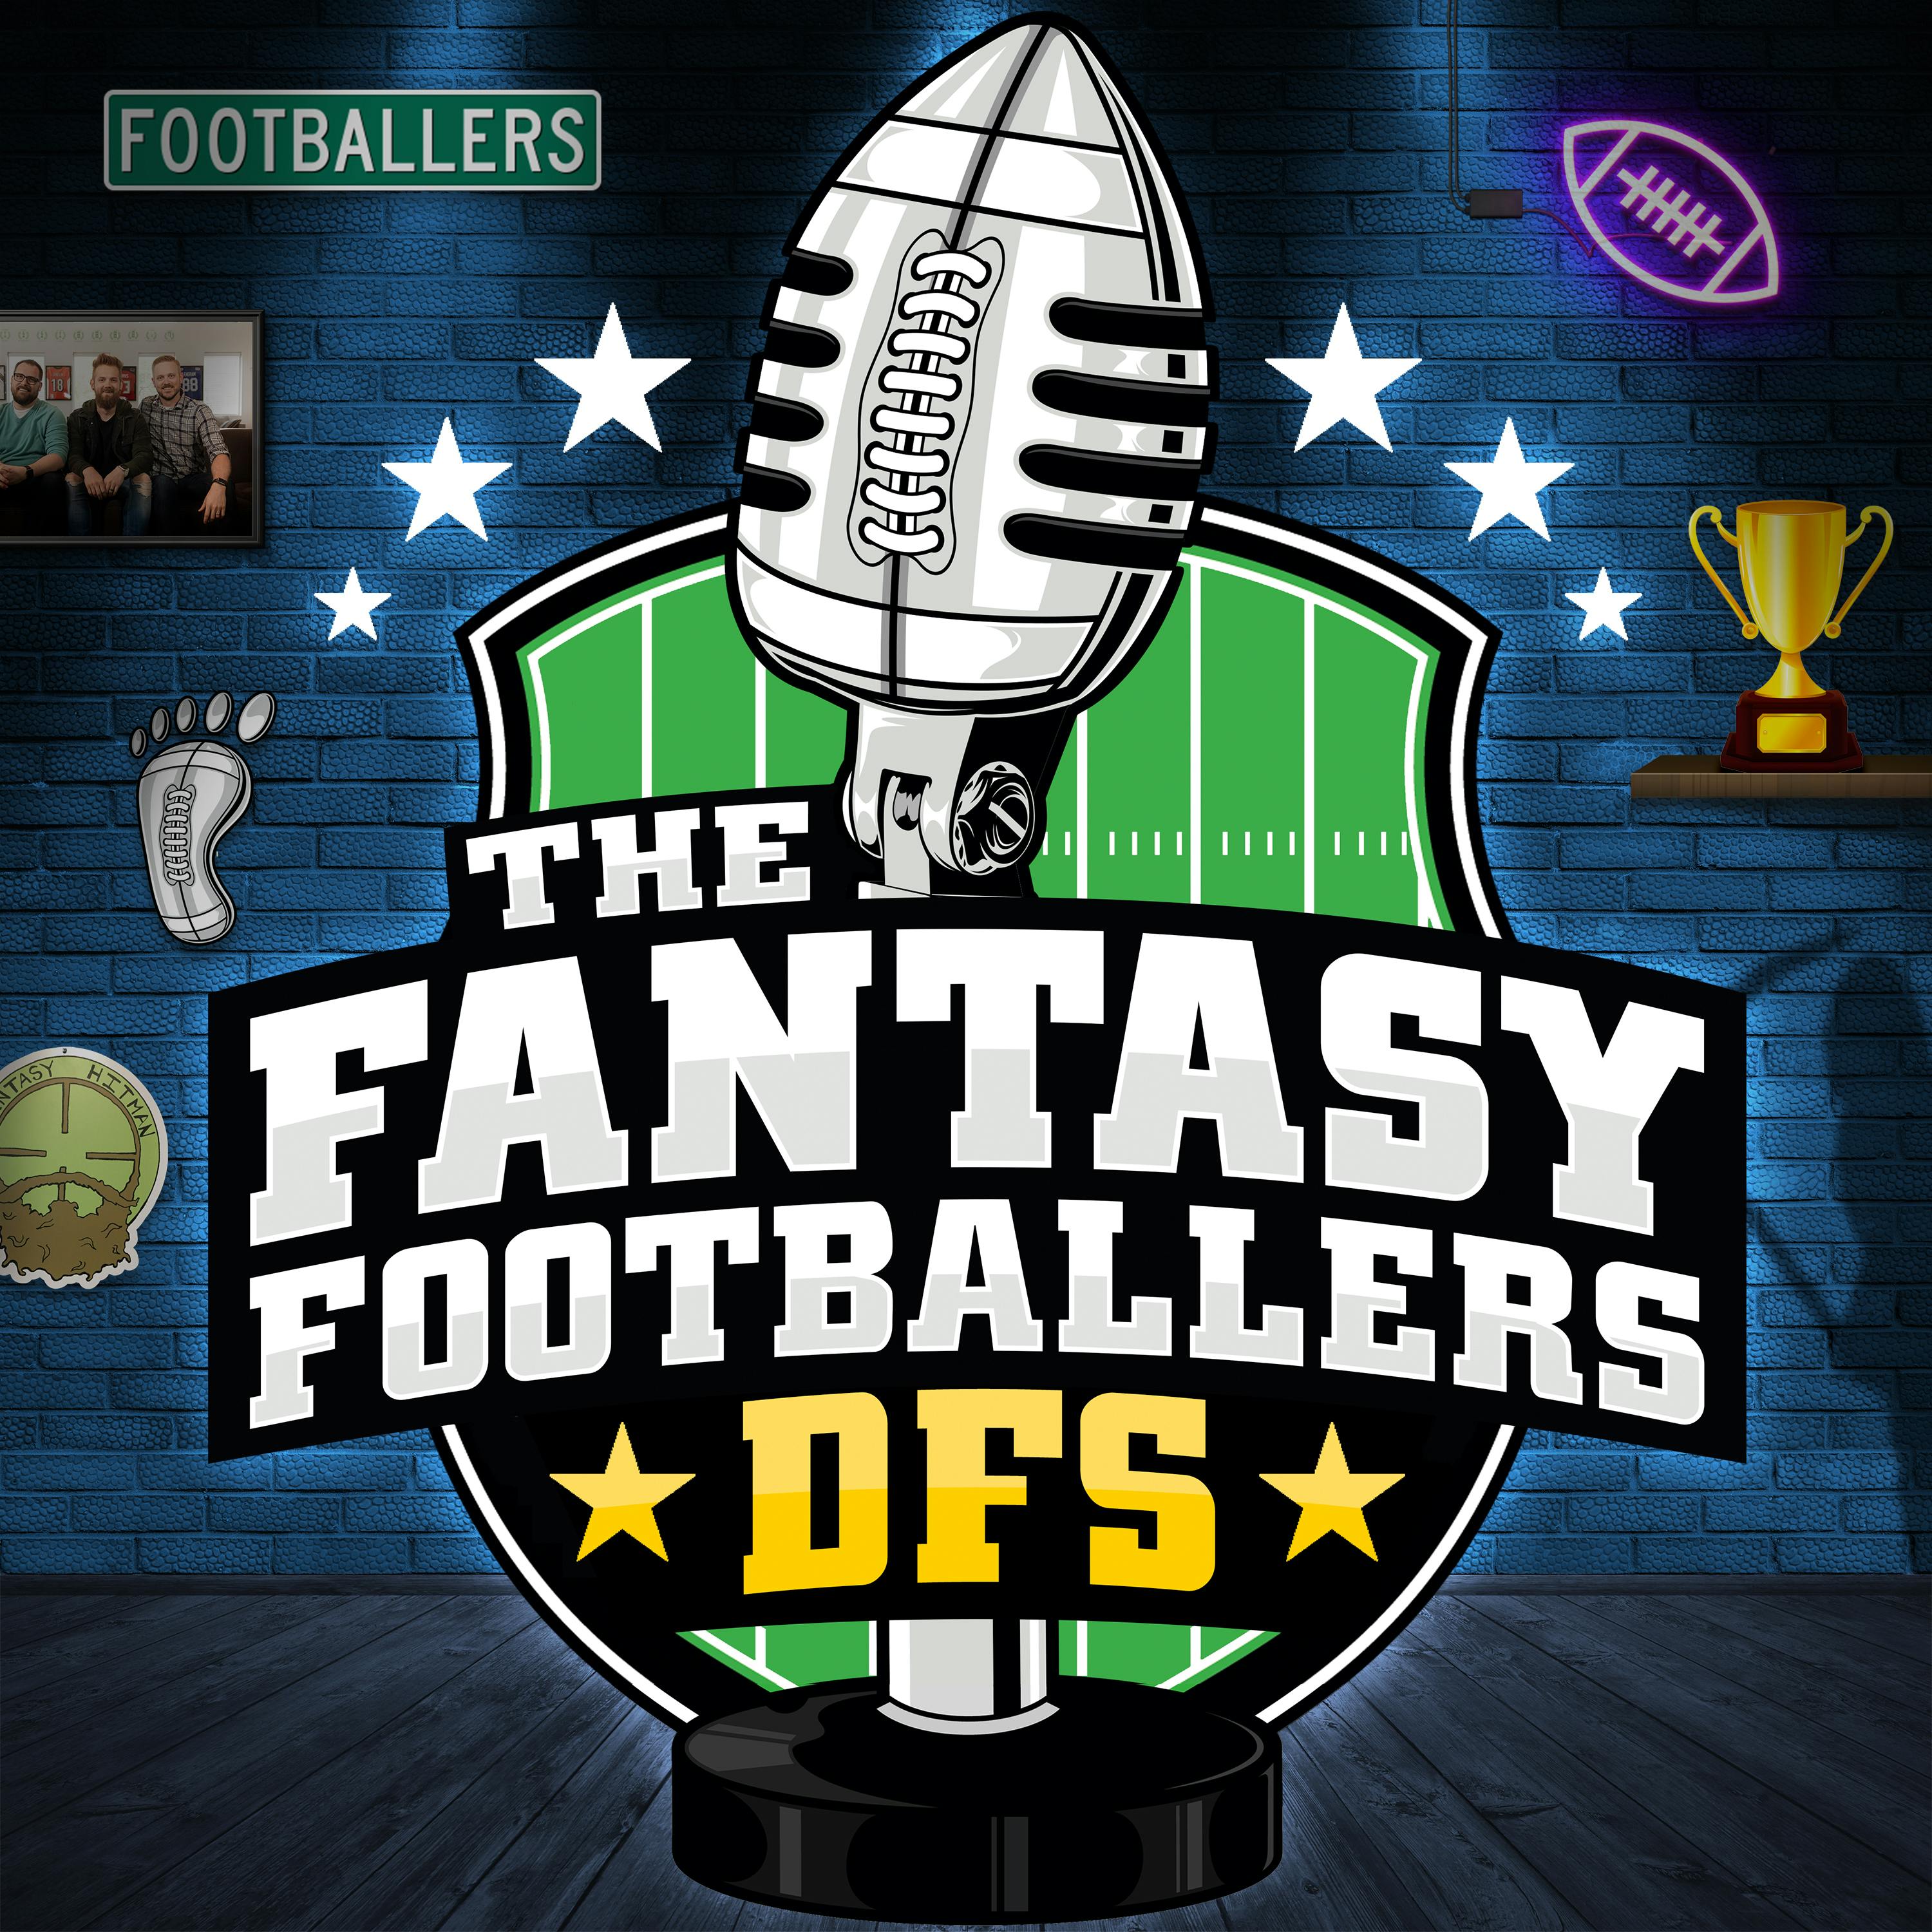 Week 16 DFS Preview + Can You Trust a Craig? - Fantasy Football DFS